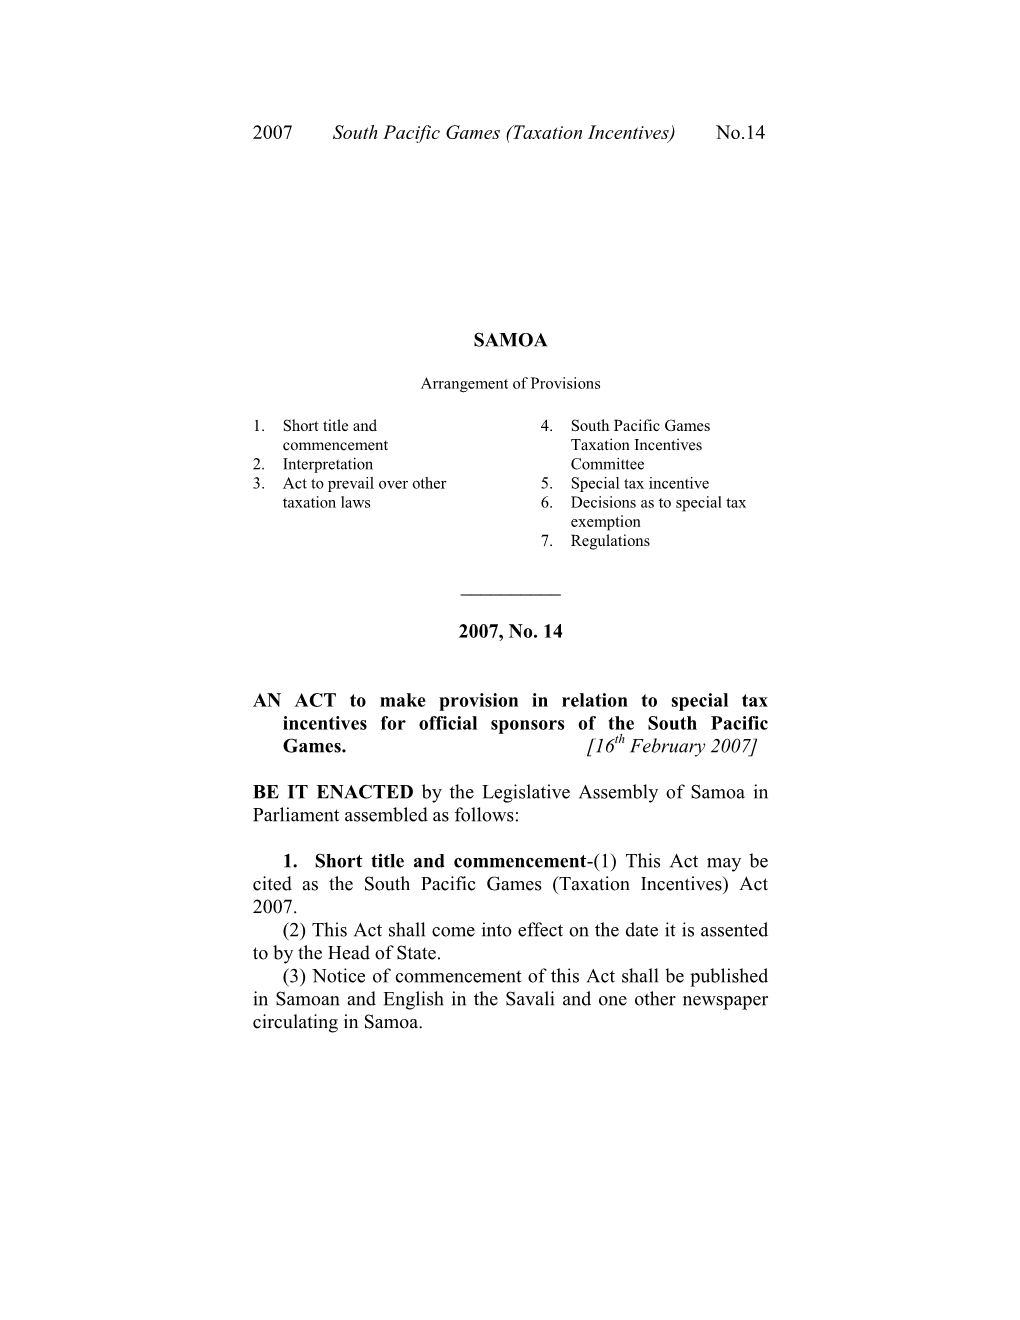 South Pacific Games (Taxation Incentives) No.14